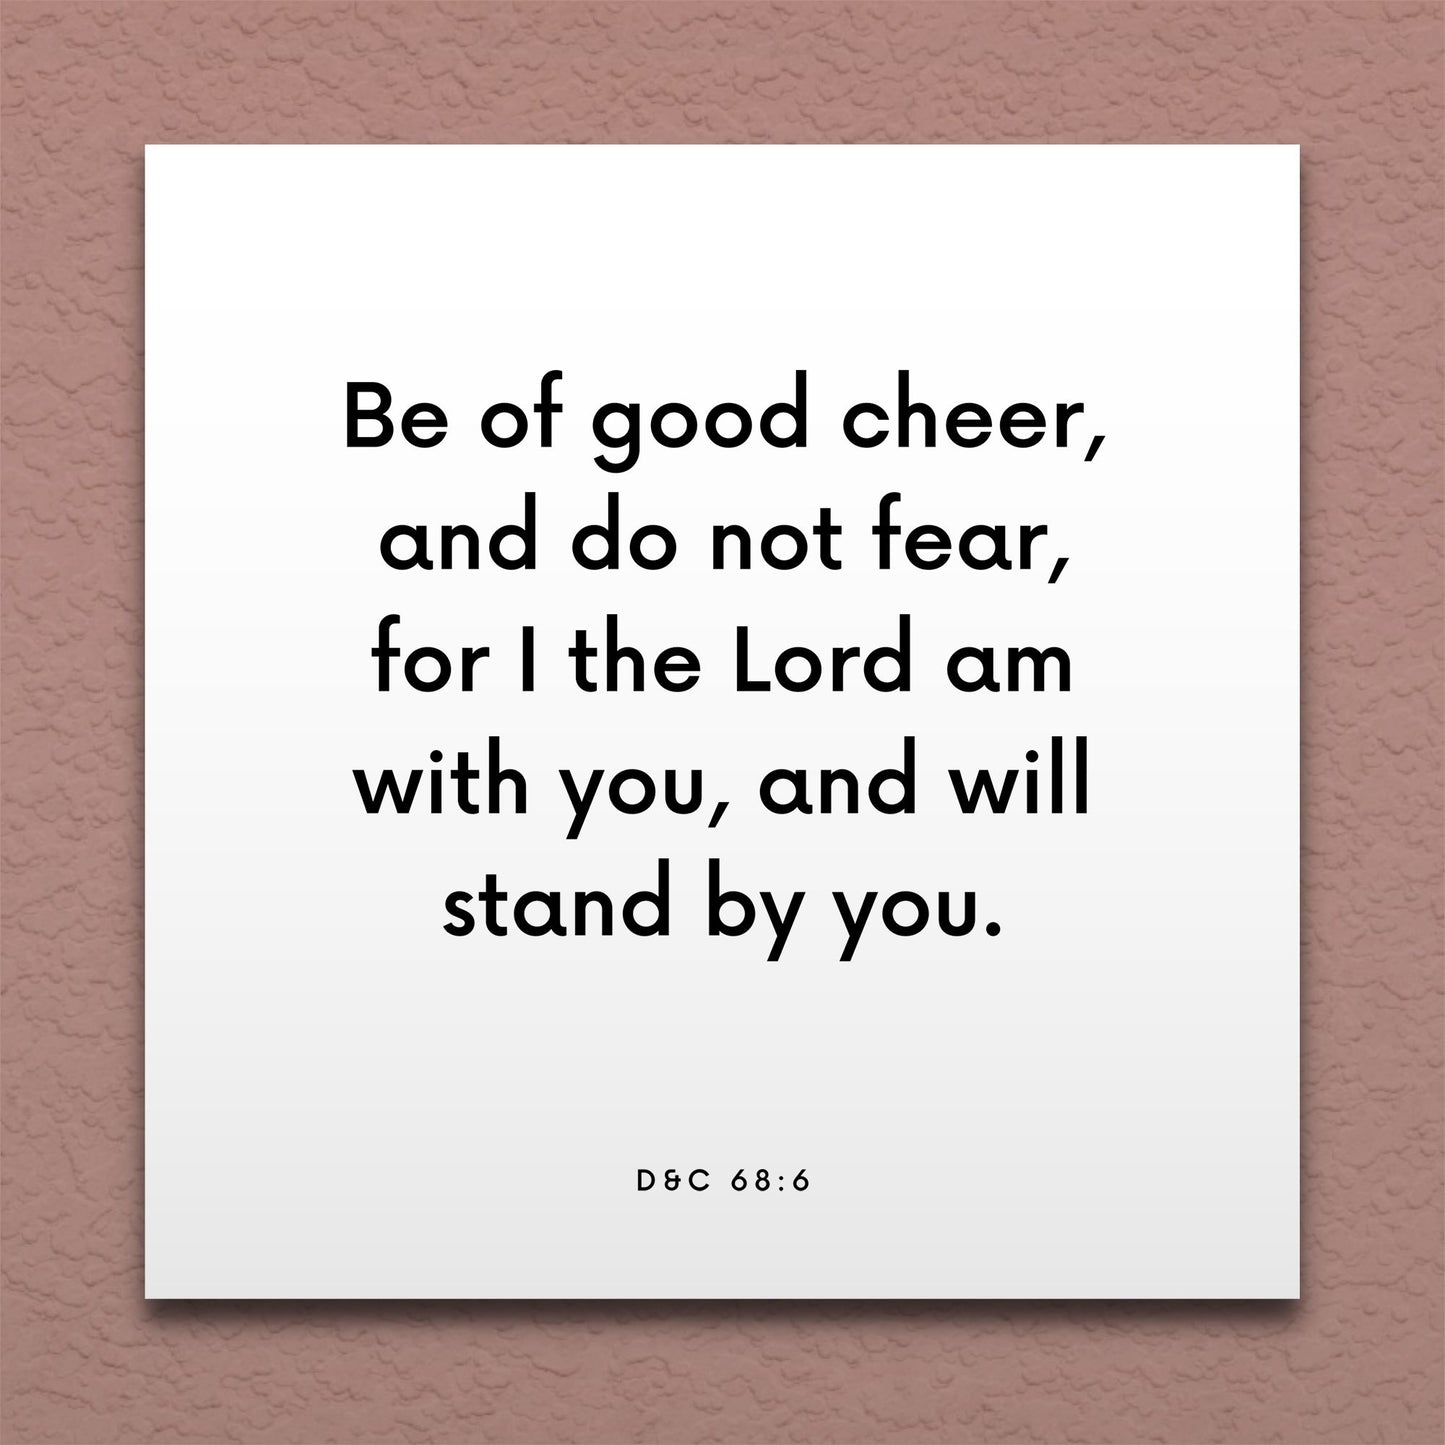 Wall-mounted scripture tile for D&C 68:6 - "Be of good cheer, and do not fear"